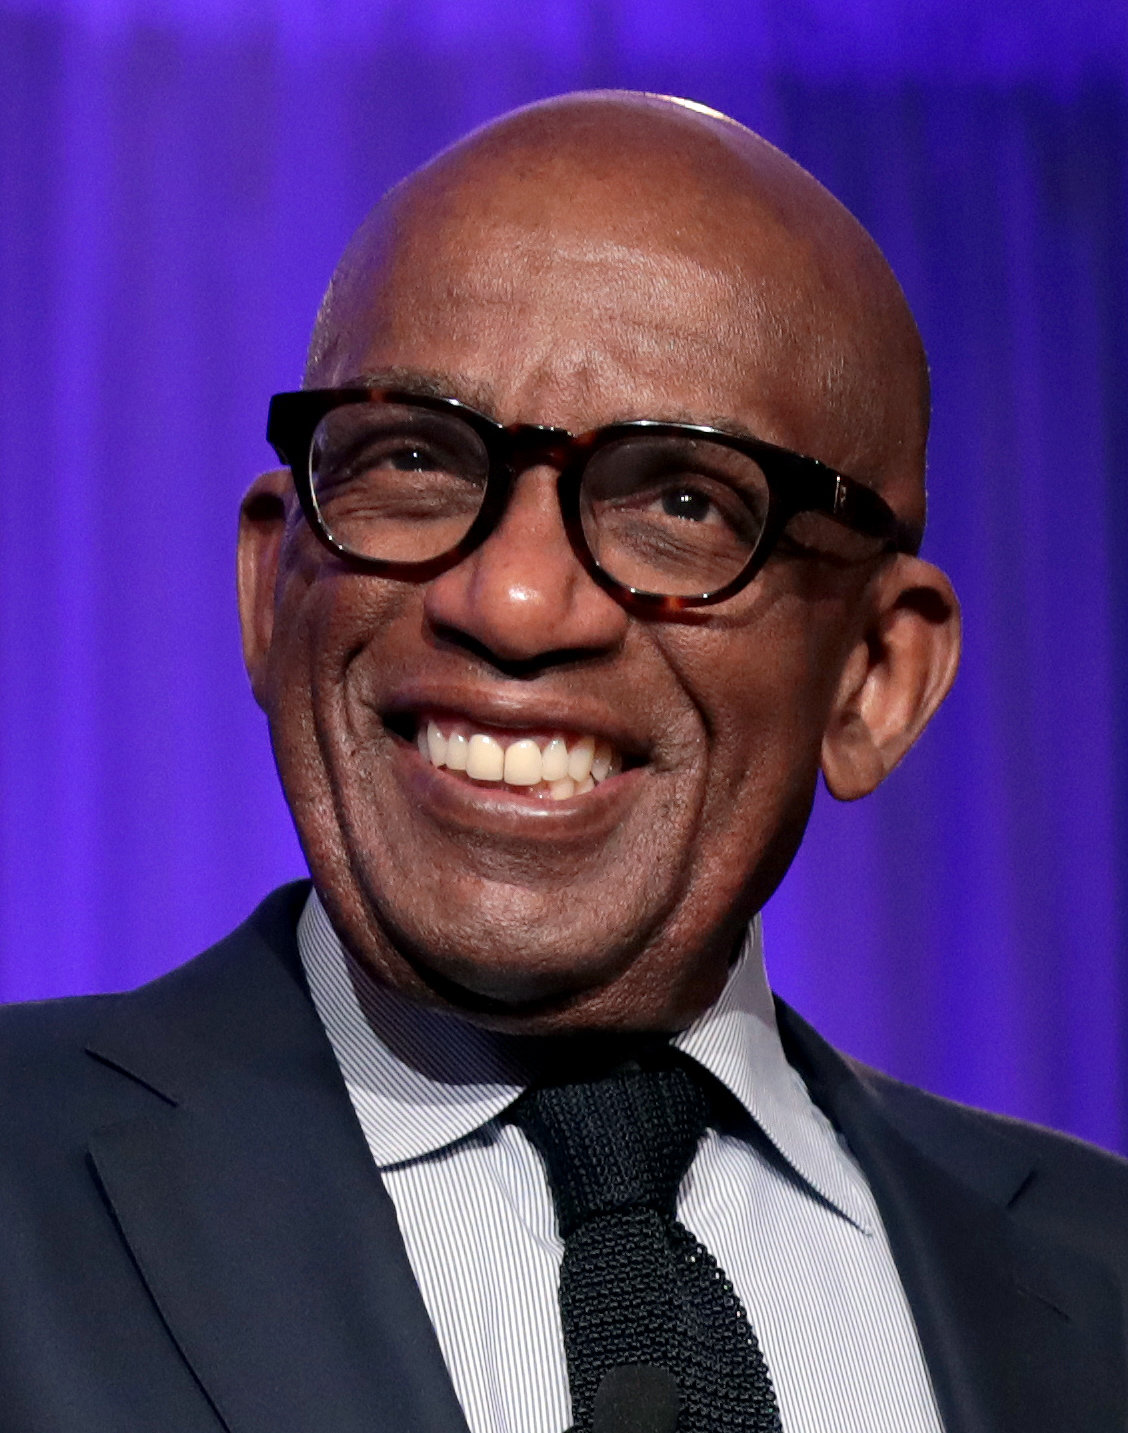 Al Roker Biography, Age, Height, Wife, Family, Education, Career, Net Worth, Salary